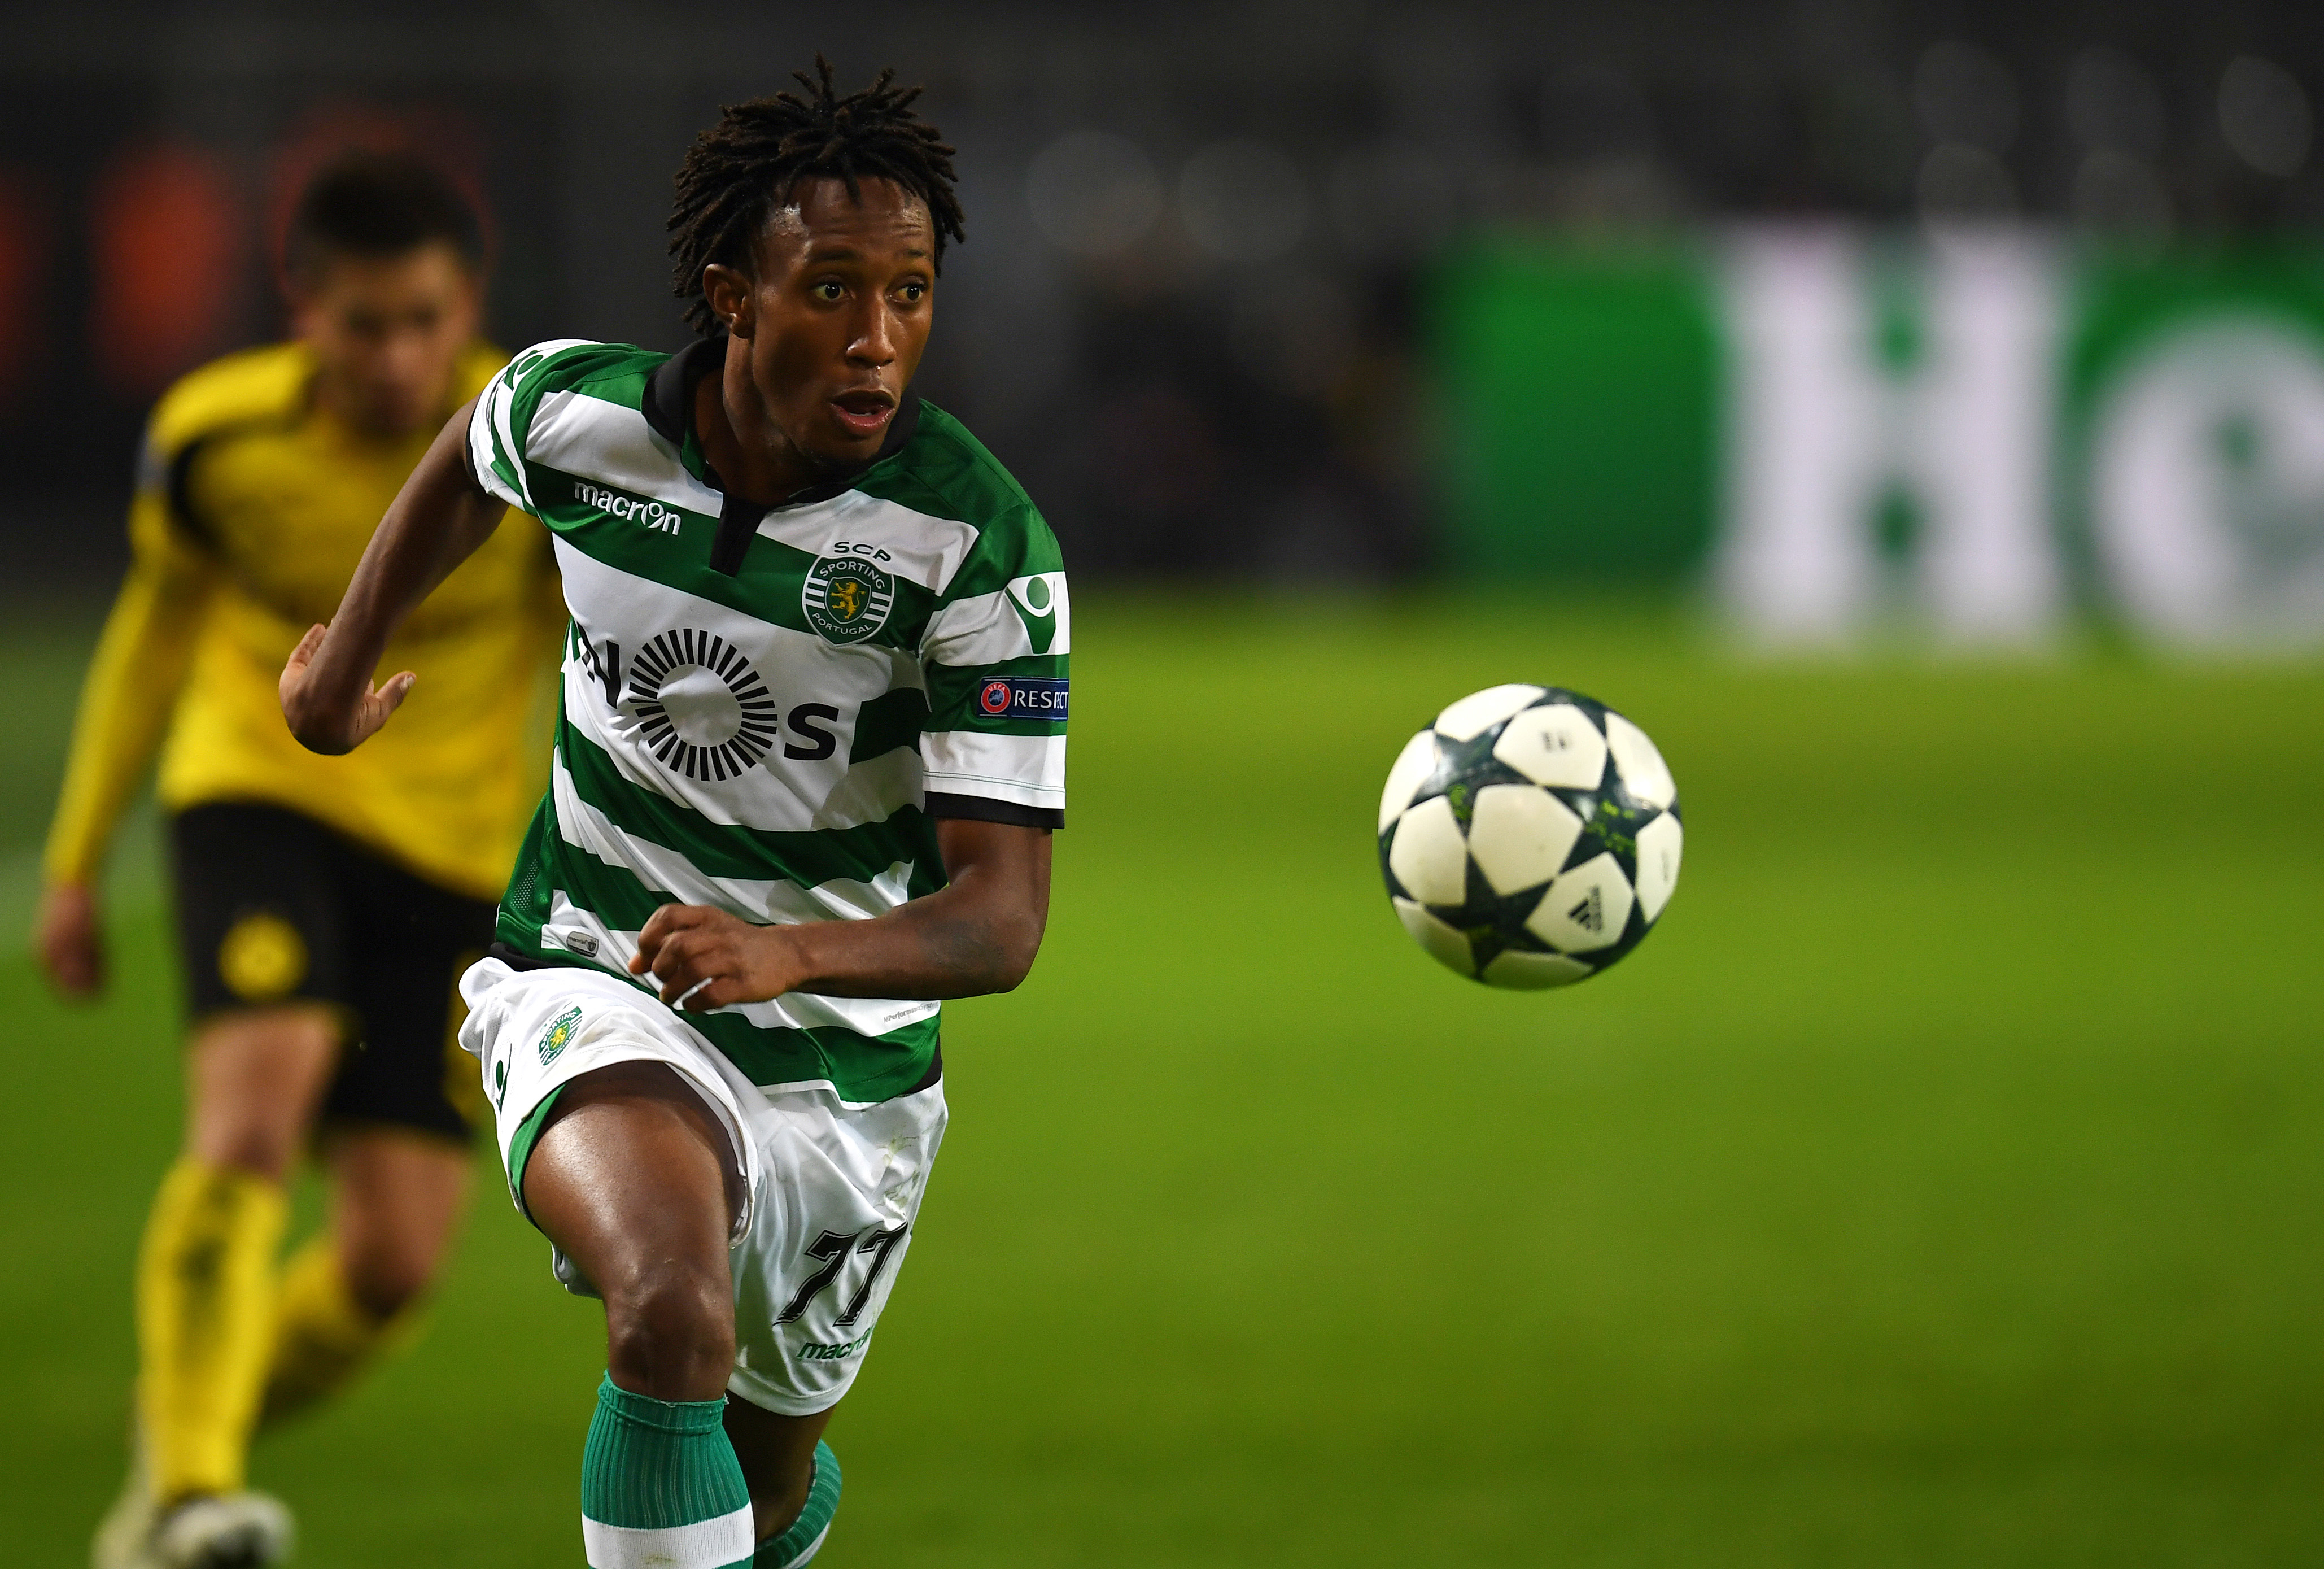 Sporting´s Gelson Martins vies for the ball UEFA Champions League Group F football match between BVB Borussia Dortmund and Sporting CP in Dortmund, western Germany, on November 2, 2016. / AFP / PATRIK STOLLARZ (Photo credit should read PATRIK STOLLARZ/AFP/Getty Images)